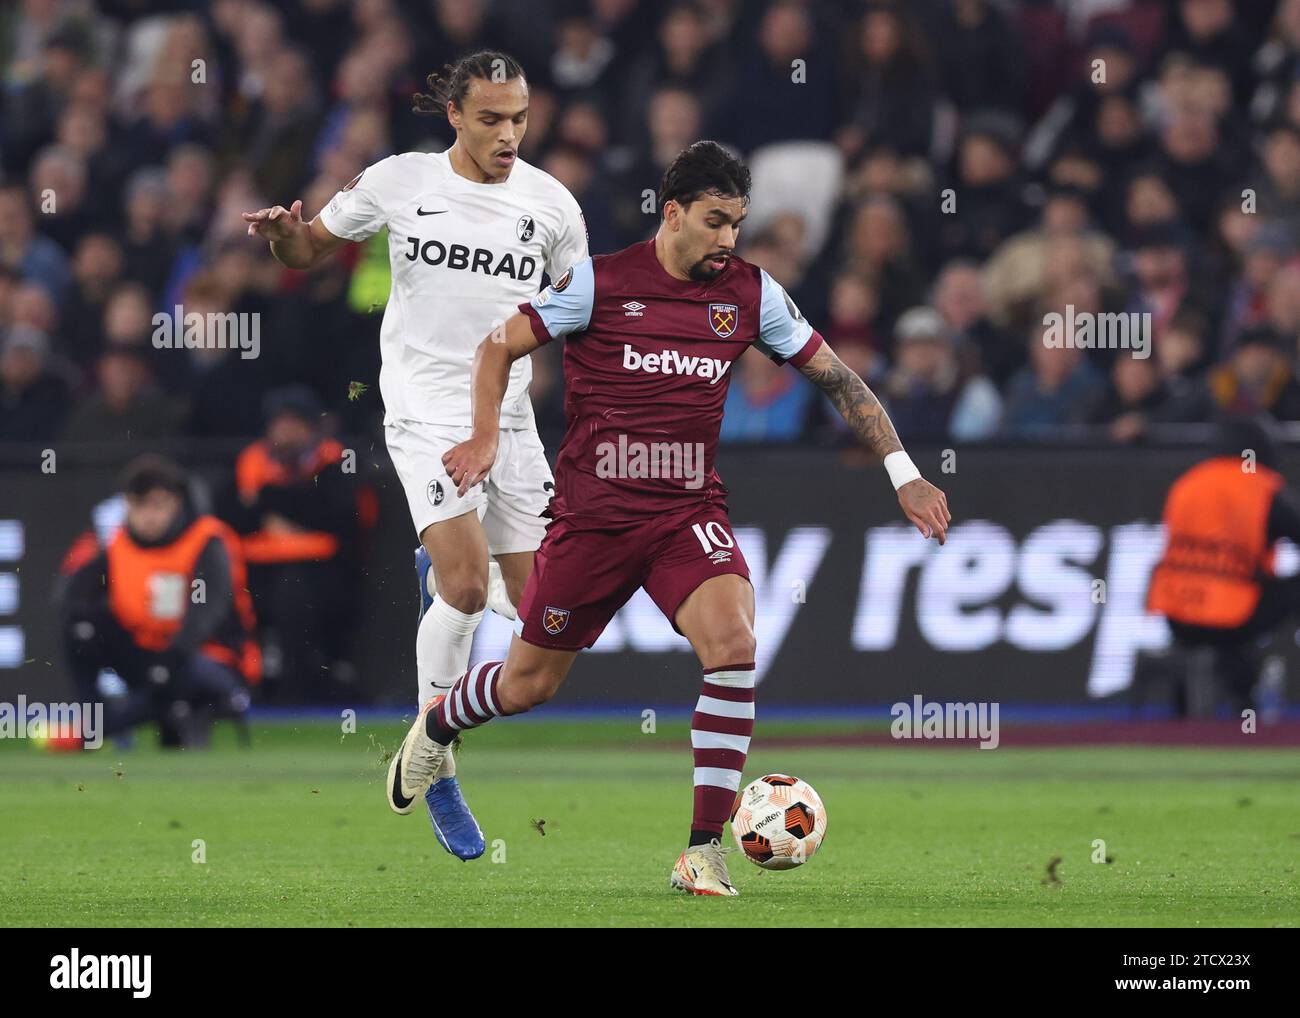 London, UK. 14th Dec, 2023. Kiliann Sildillia of SC Freiburg tussles with Lucas Paqueta of West Ham United during the UEFA Europa League match at the London Stadium, London. Picture credit should read: David Klein/Sportimage Credit: Sportimage Ltd/Alamy Live News Stock Photo